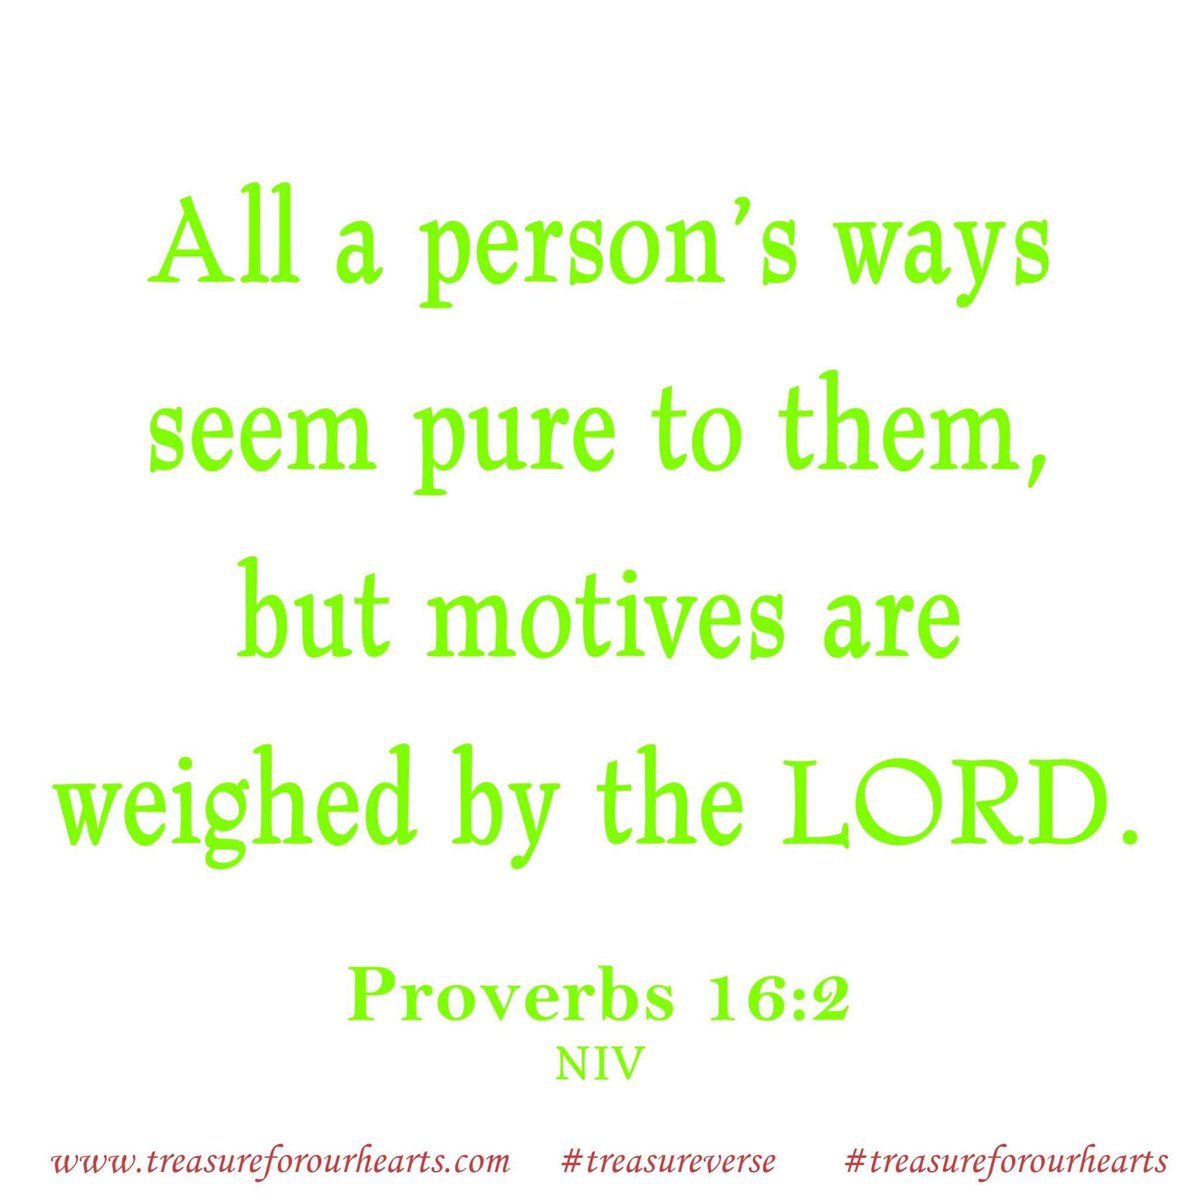 We always think we know best . . but what are our true motives?

#treasureforourhearts #treasureverse #Godsword #bibleverse #proverbs 
Lin